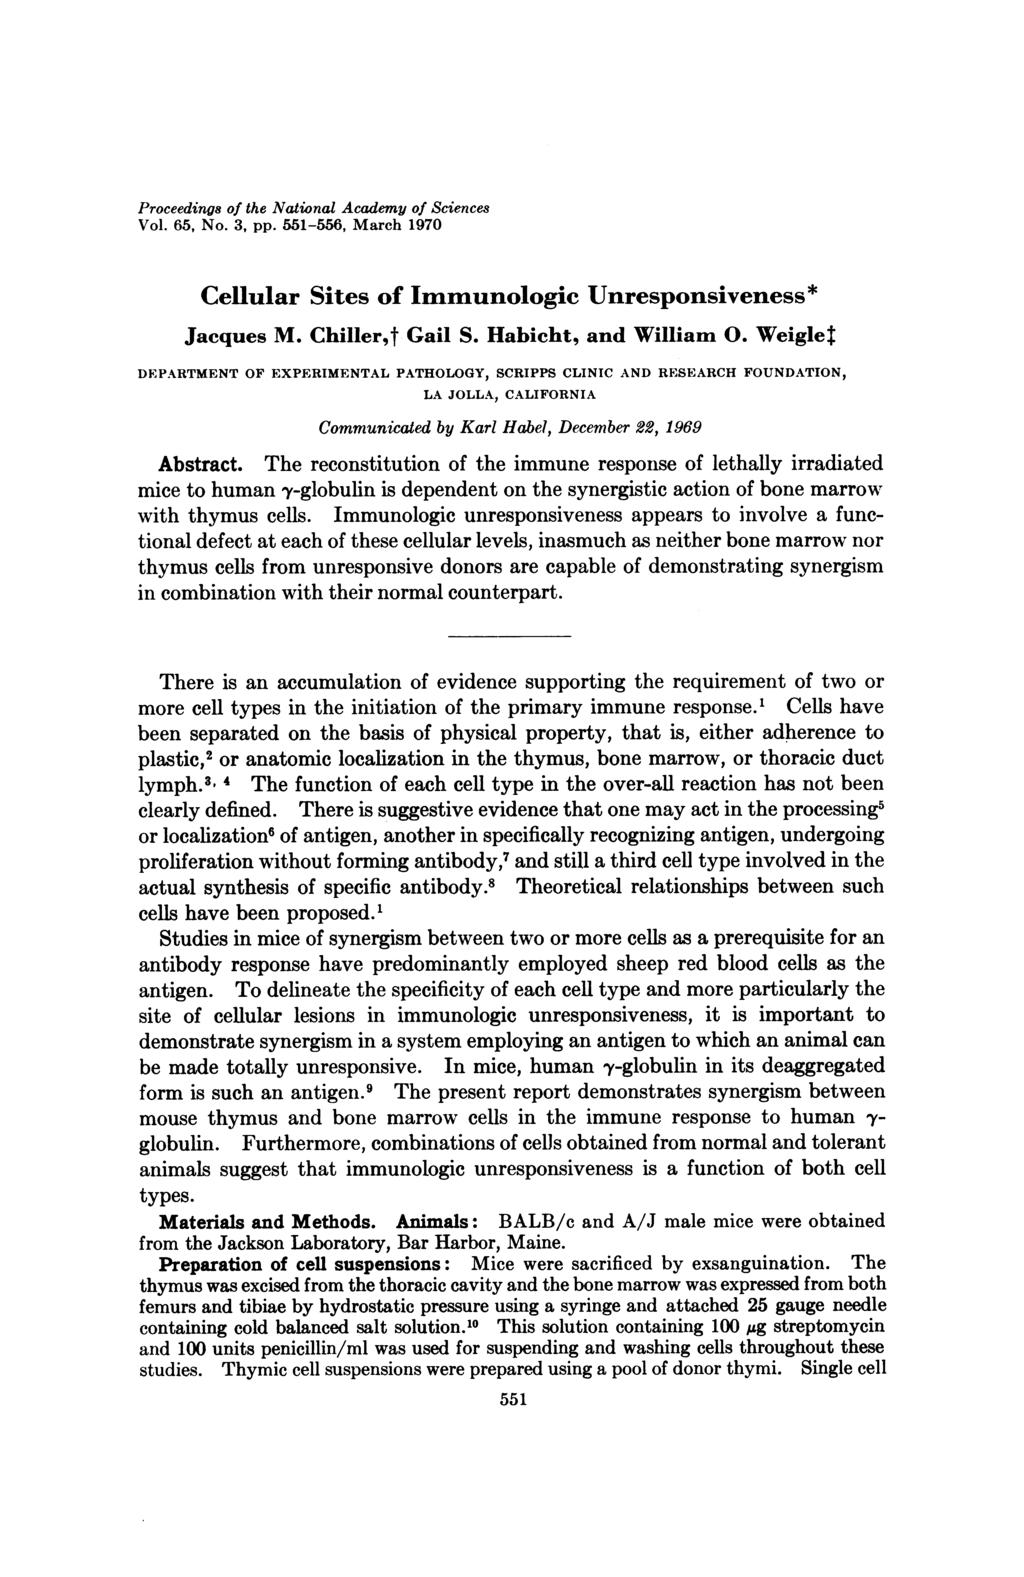 Proceedings of the National Academy of Sciences Vol. 65, No. 3, pp. 551-556, March 1970 Cellular Sites of Immunologic Unresponsiveness* Jacques M. Chiller,t Gail S. Habicht, and William 0.